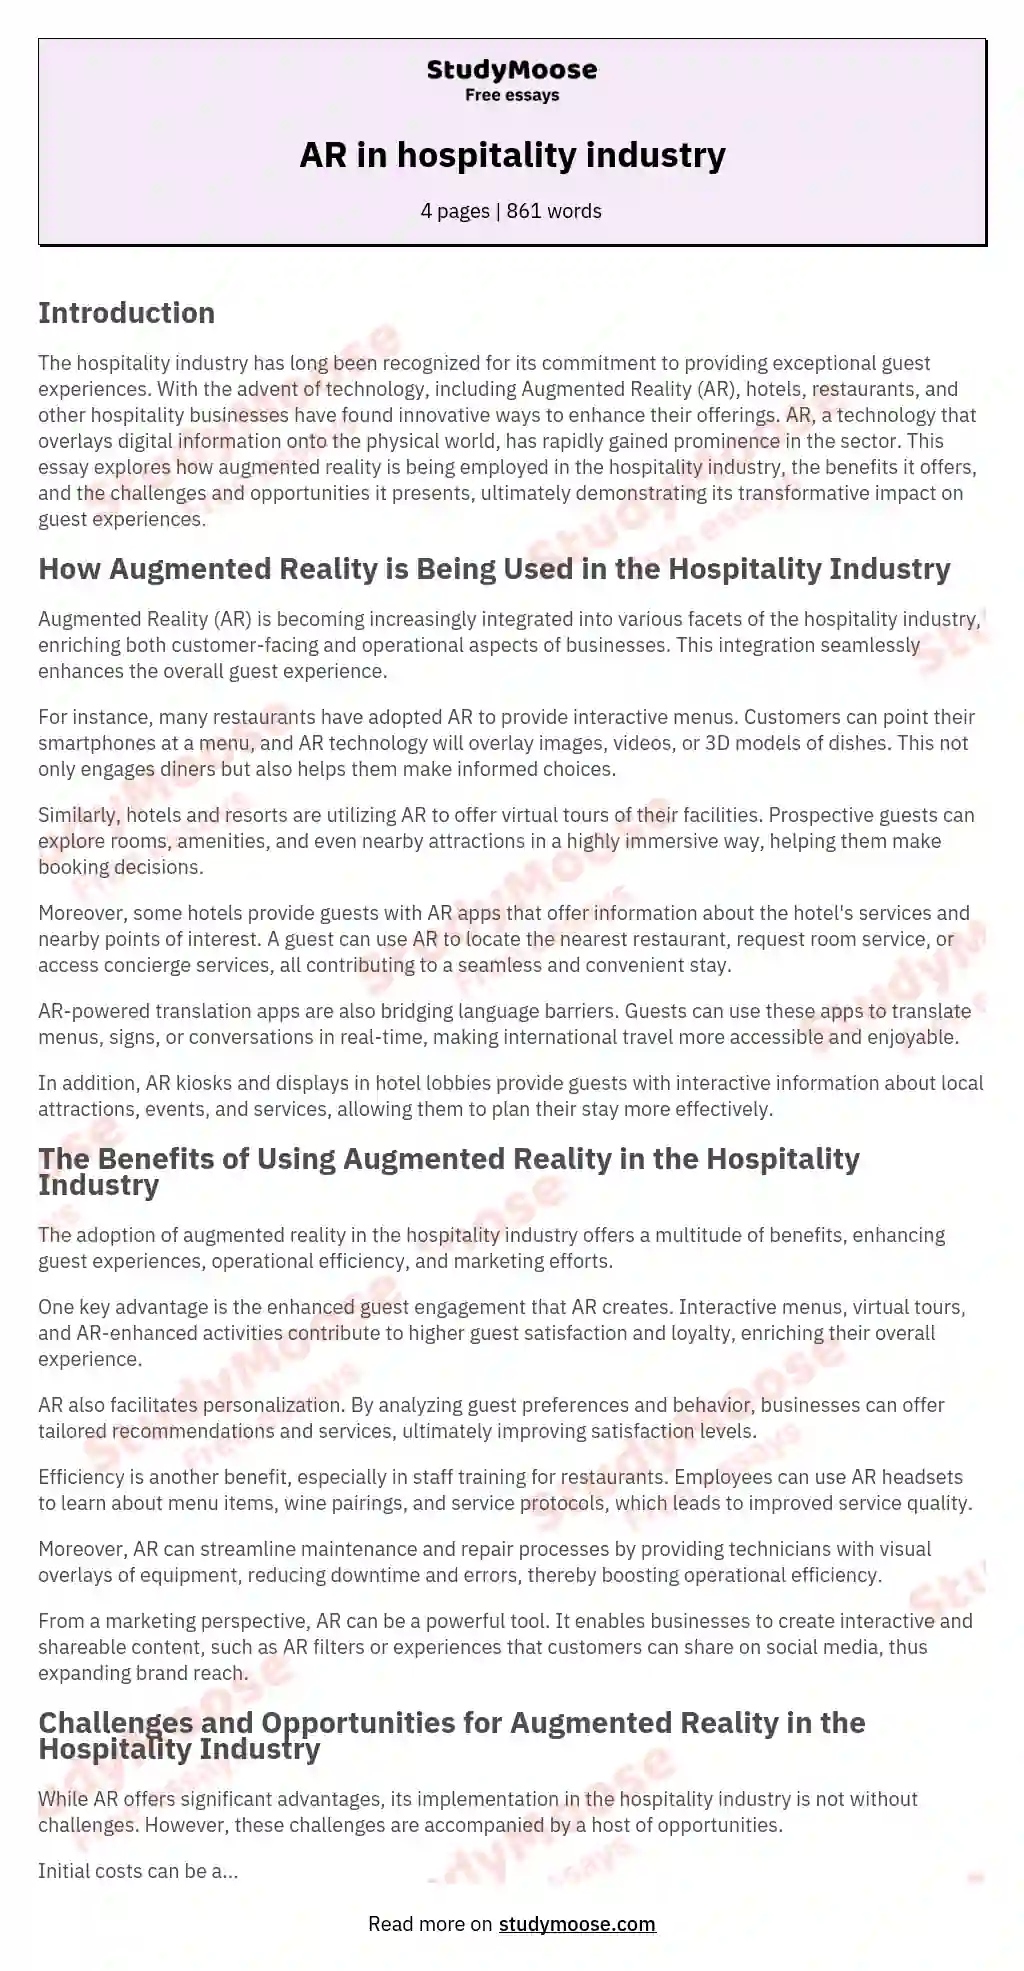 AR in hospitality industry essay